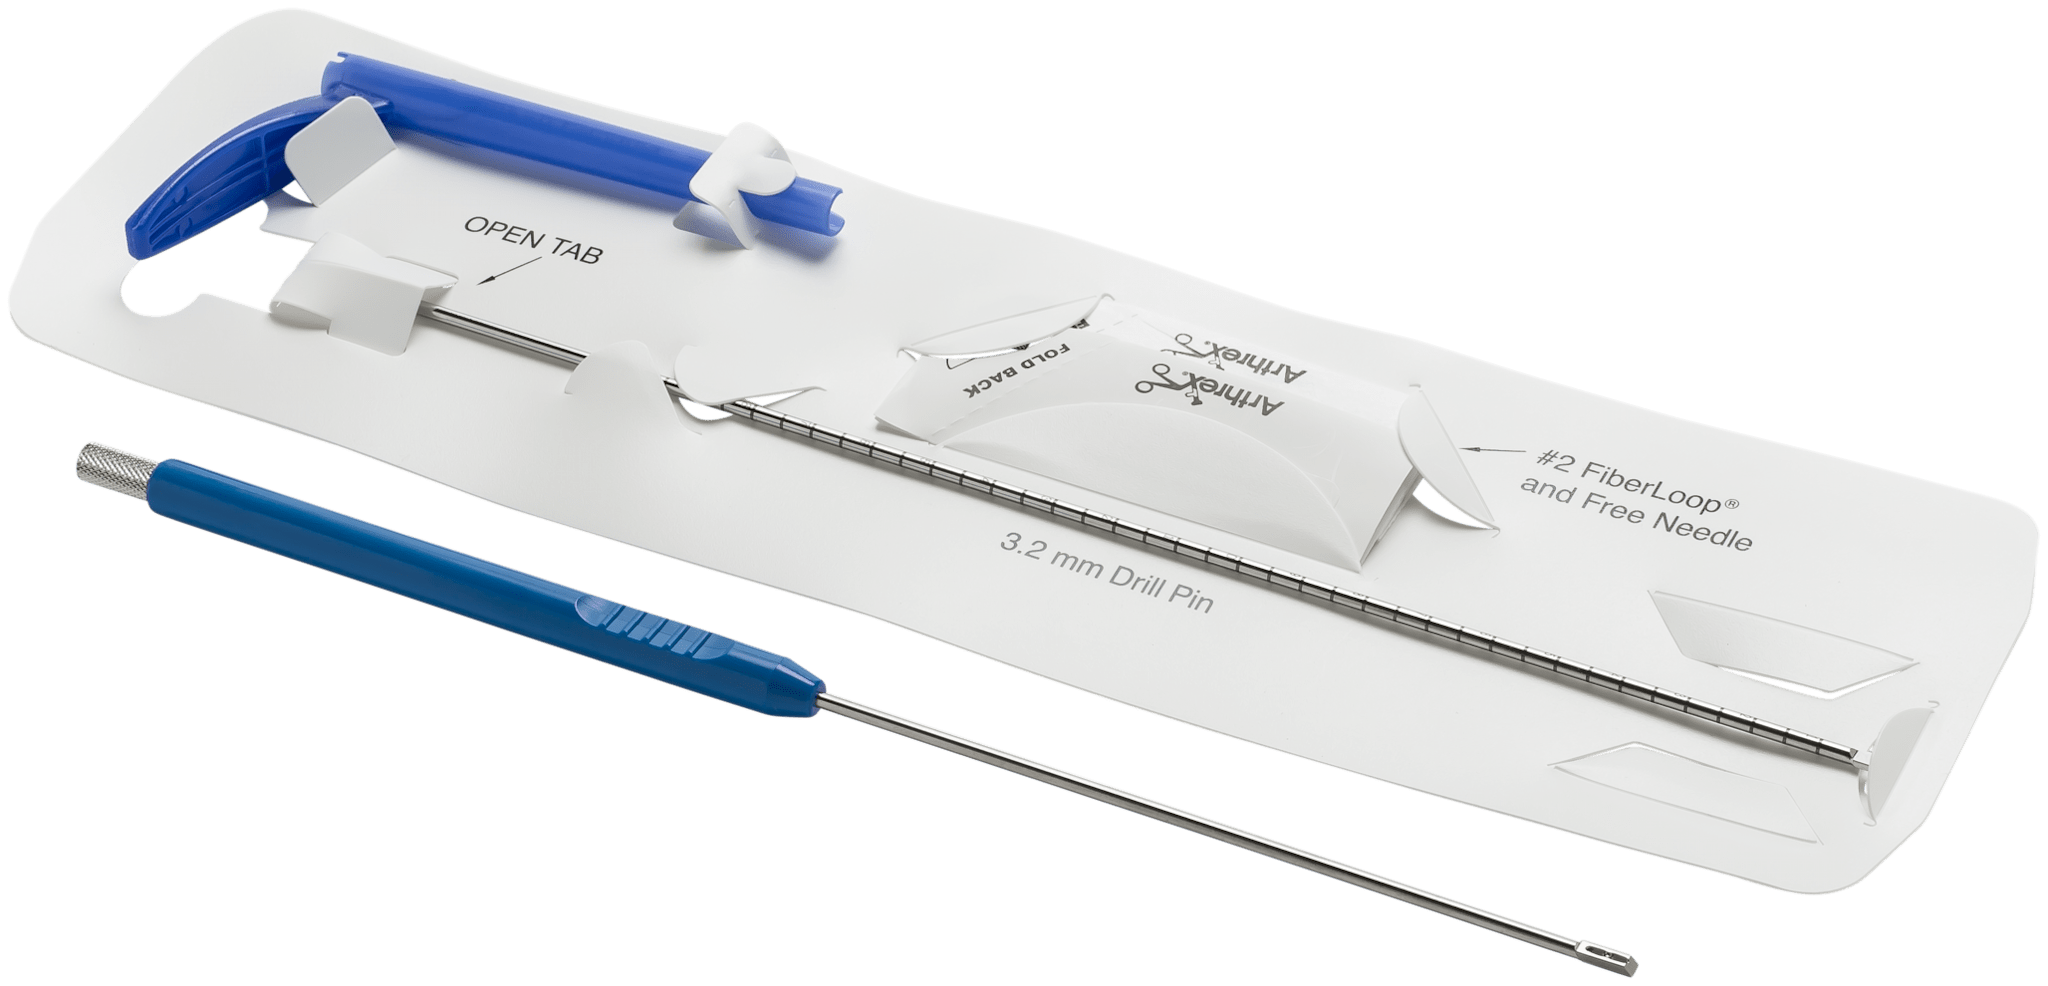 Proximal Tenodesis Implant System (Includes: Proximal BicepsButton, Button Inserter, FiberLoop Suture, Free Needles, Drill Pin and Shoehorn Cannula)